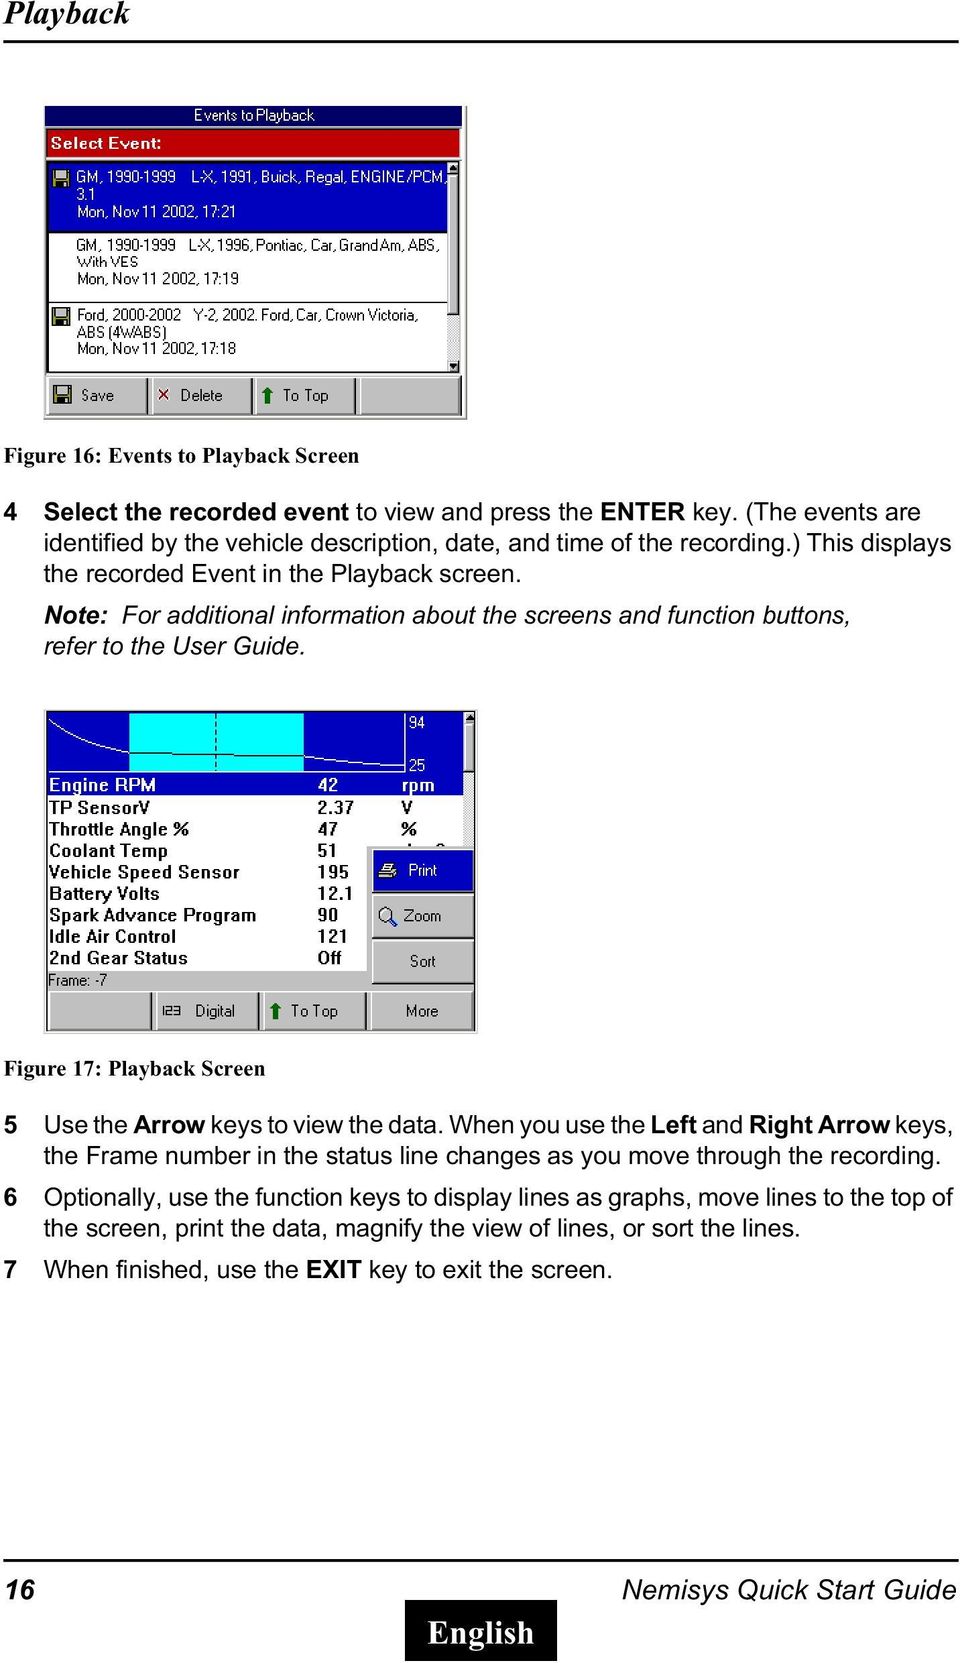 Figure 17: Playback Screen 5 Use the Arrow keys to view the data. When you use the Left and Right Arrow keys, the Frame number in the status line changes as you move through the recording.